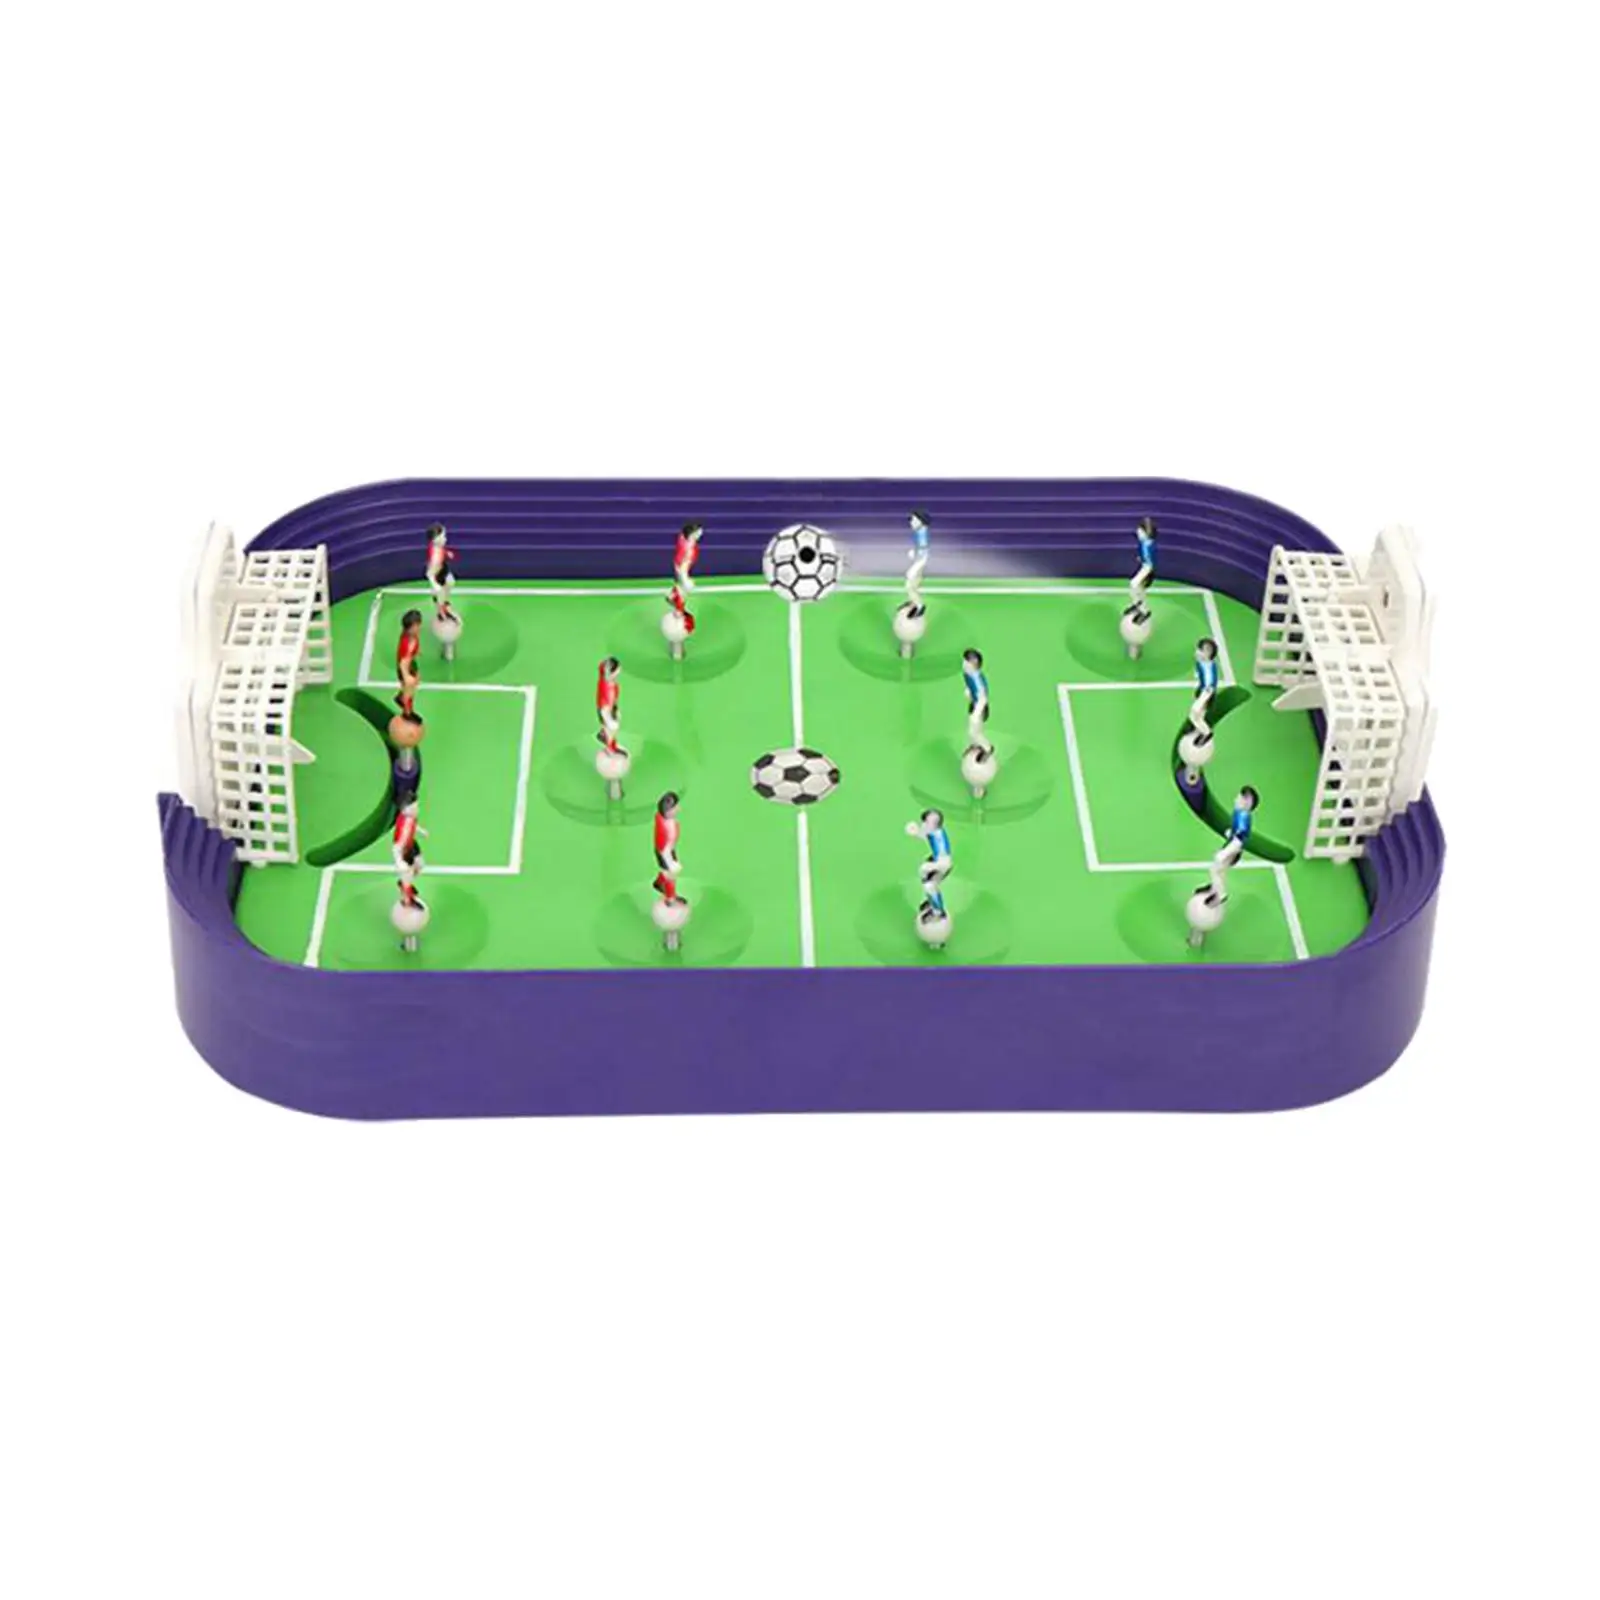 Portable Table Football Game Indoor Sport Toy Table Board Interactive Toy Mini Tabletop Football for Kids Boy Girls Teens